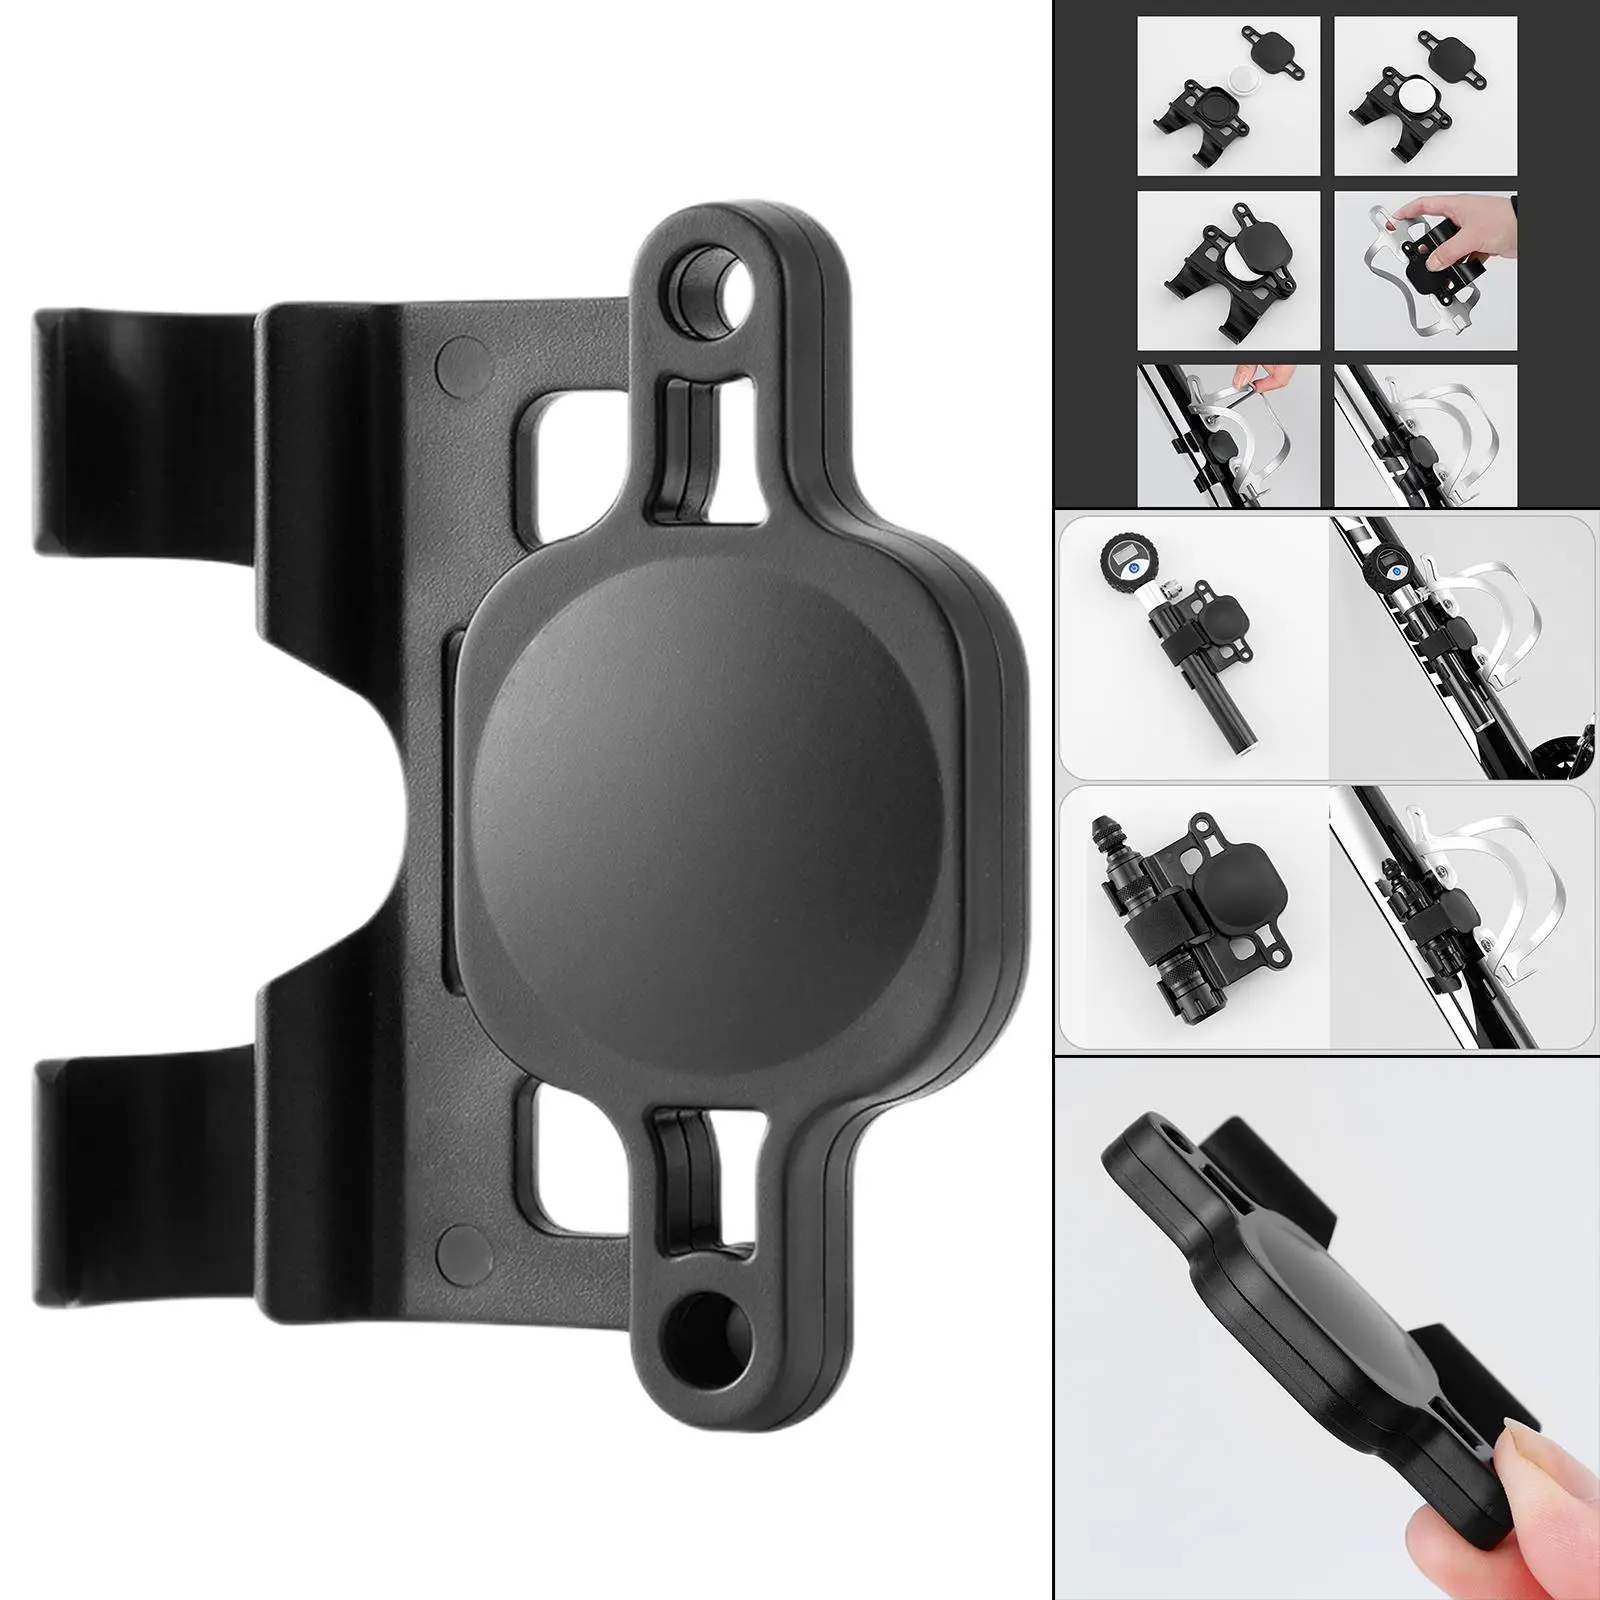 Sturdy Bicycle Tracker Protective Cover with Rack Hide Locator Fixed Holder Parts with Accessories Case Plastic for Positioning